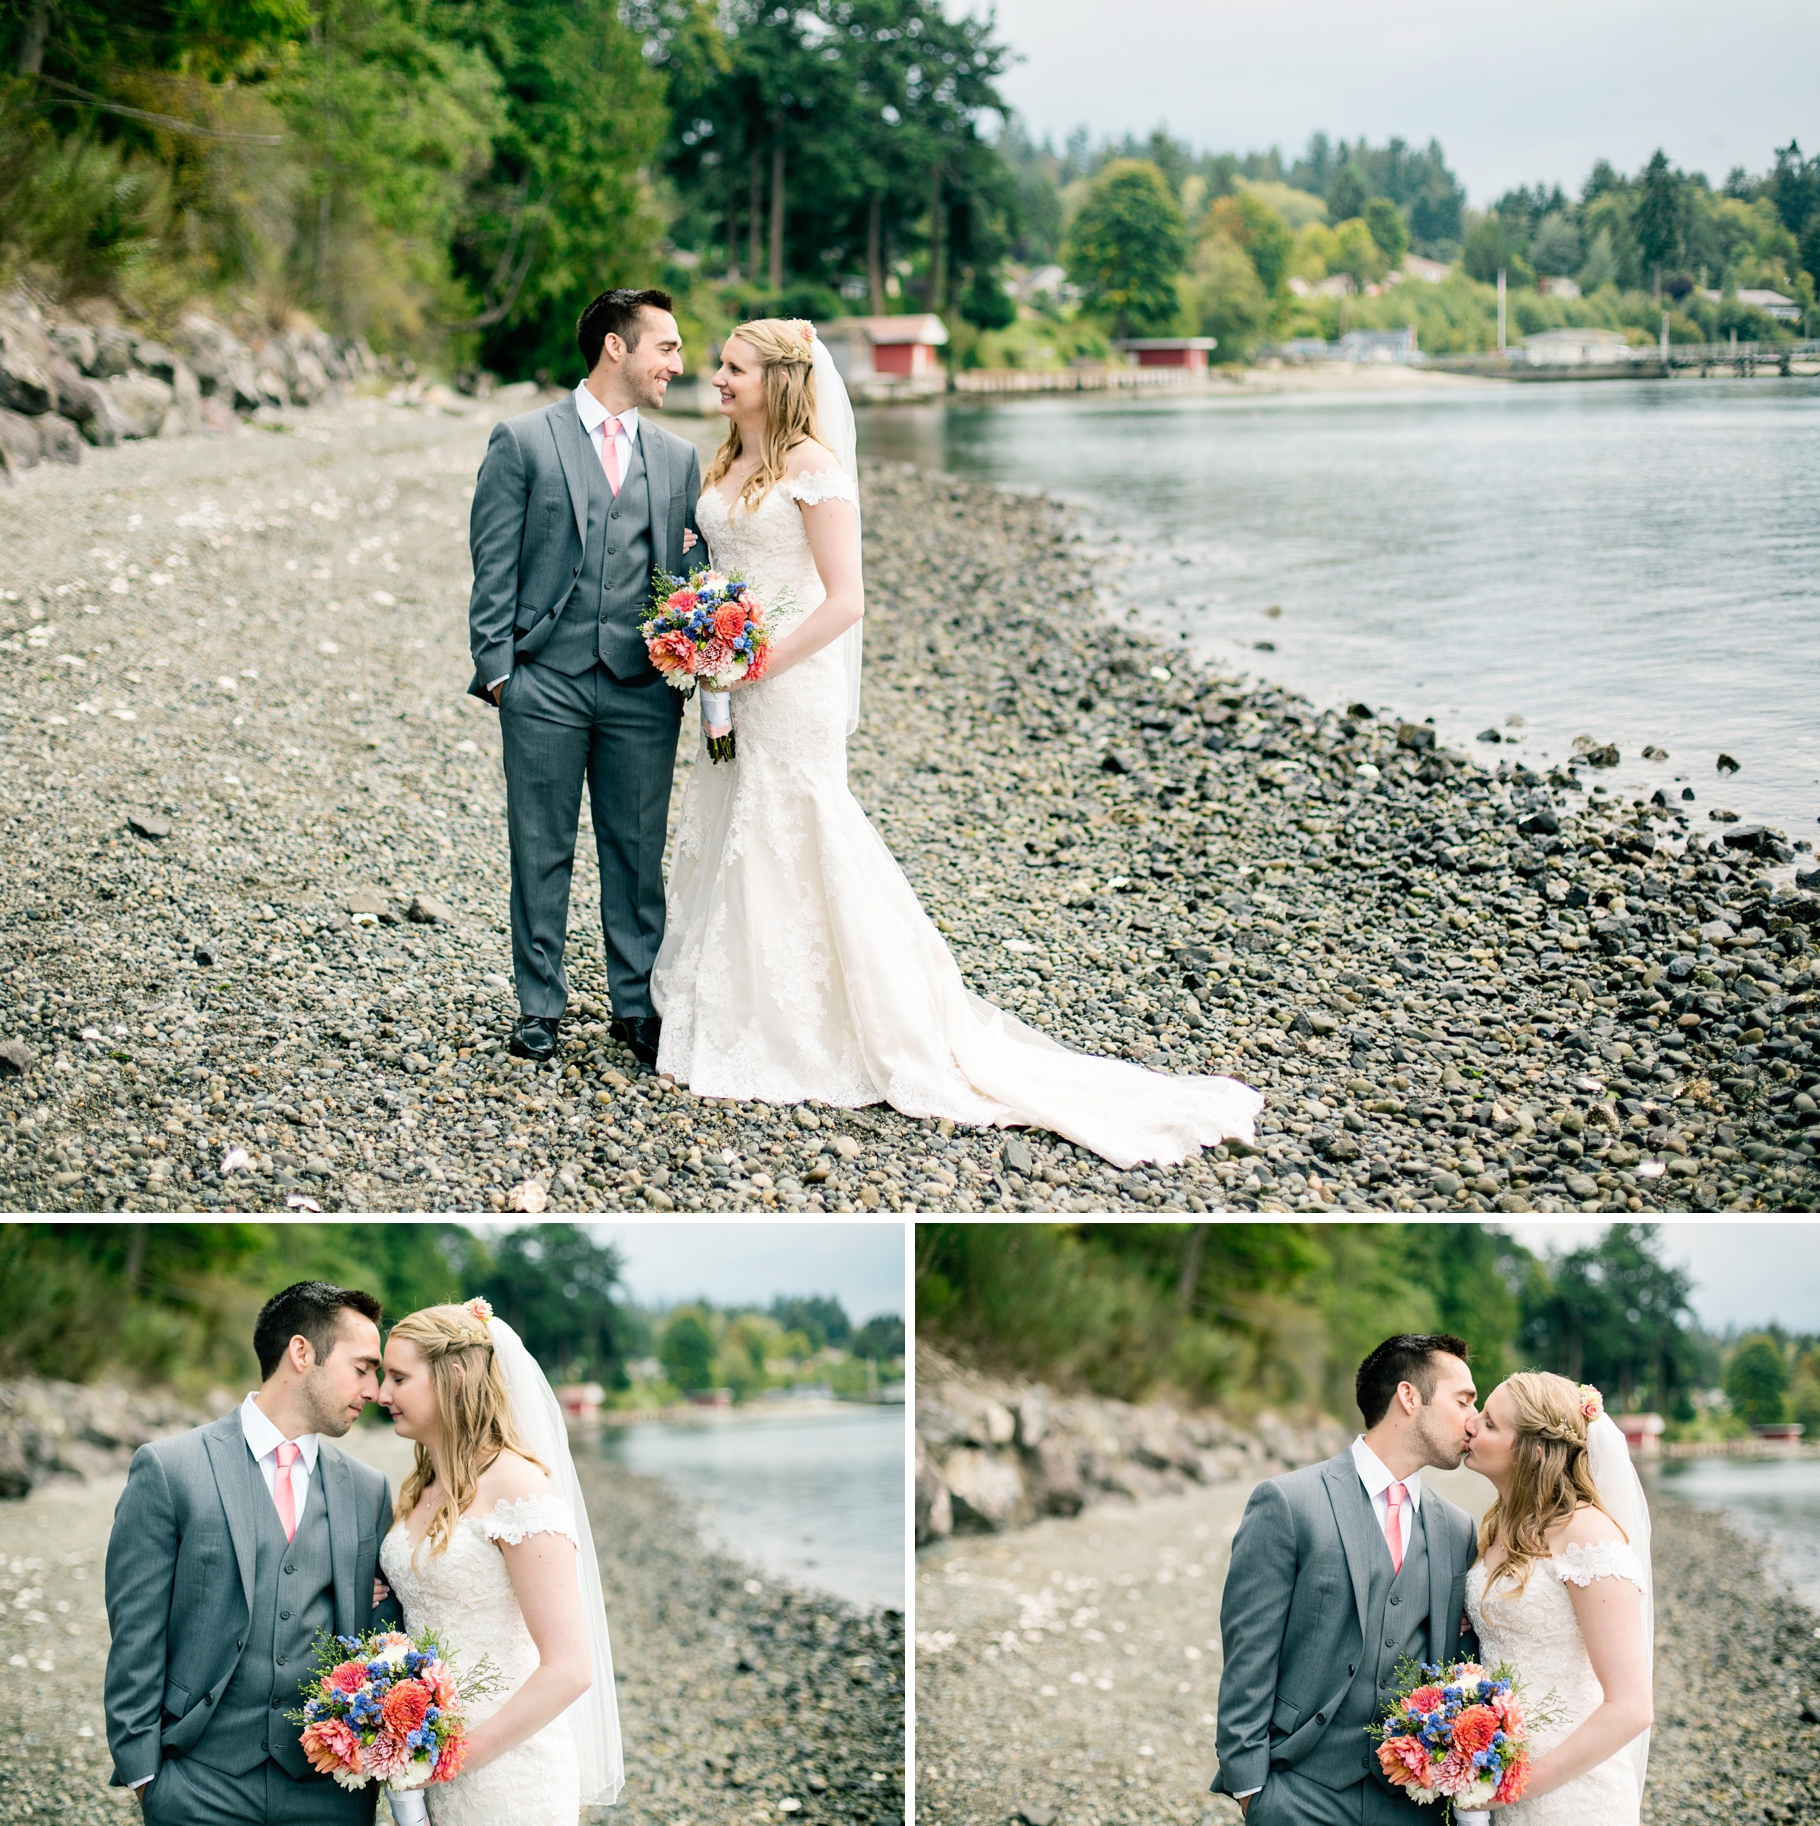 45-Bride-Groom-Portraits-Married-Bridal-Beach-Ocean-Romantic-wooded-bluff-olympic-mountains-log-cabin-Kitsap-Memorial-State-Park-Forest-Northwest-Photographer-Seattle-Wedding-Photography-by-Betty-Elaine